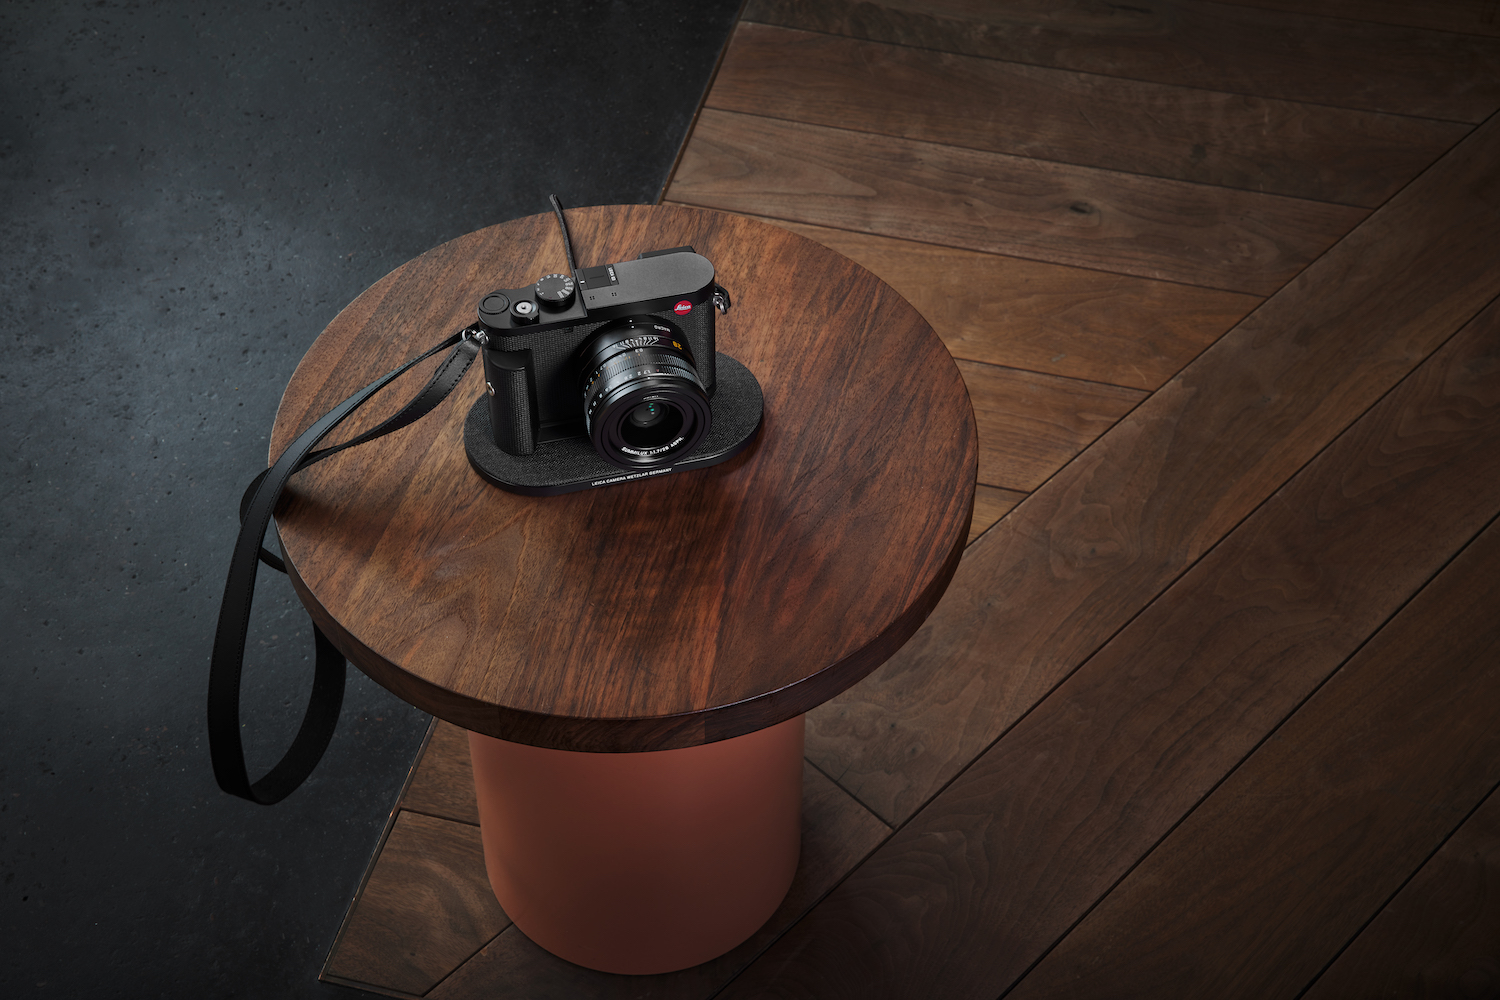 a Leica Q3 camera on a wooden stool